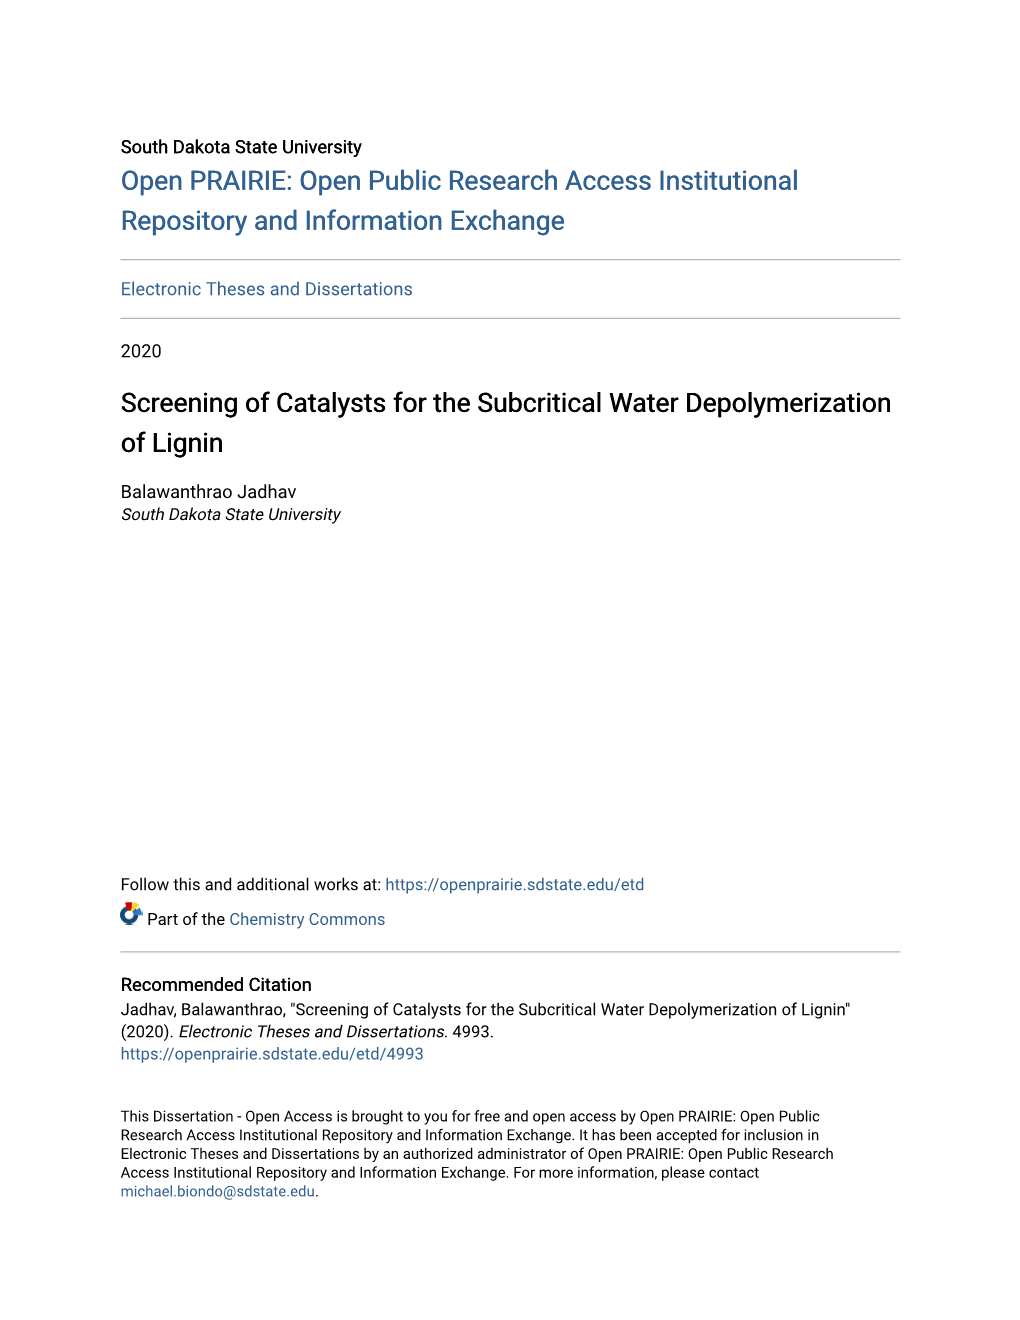 Screening of Catalysts for the Subcritical Water Depolymerization of Lignin